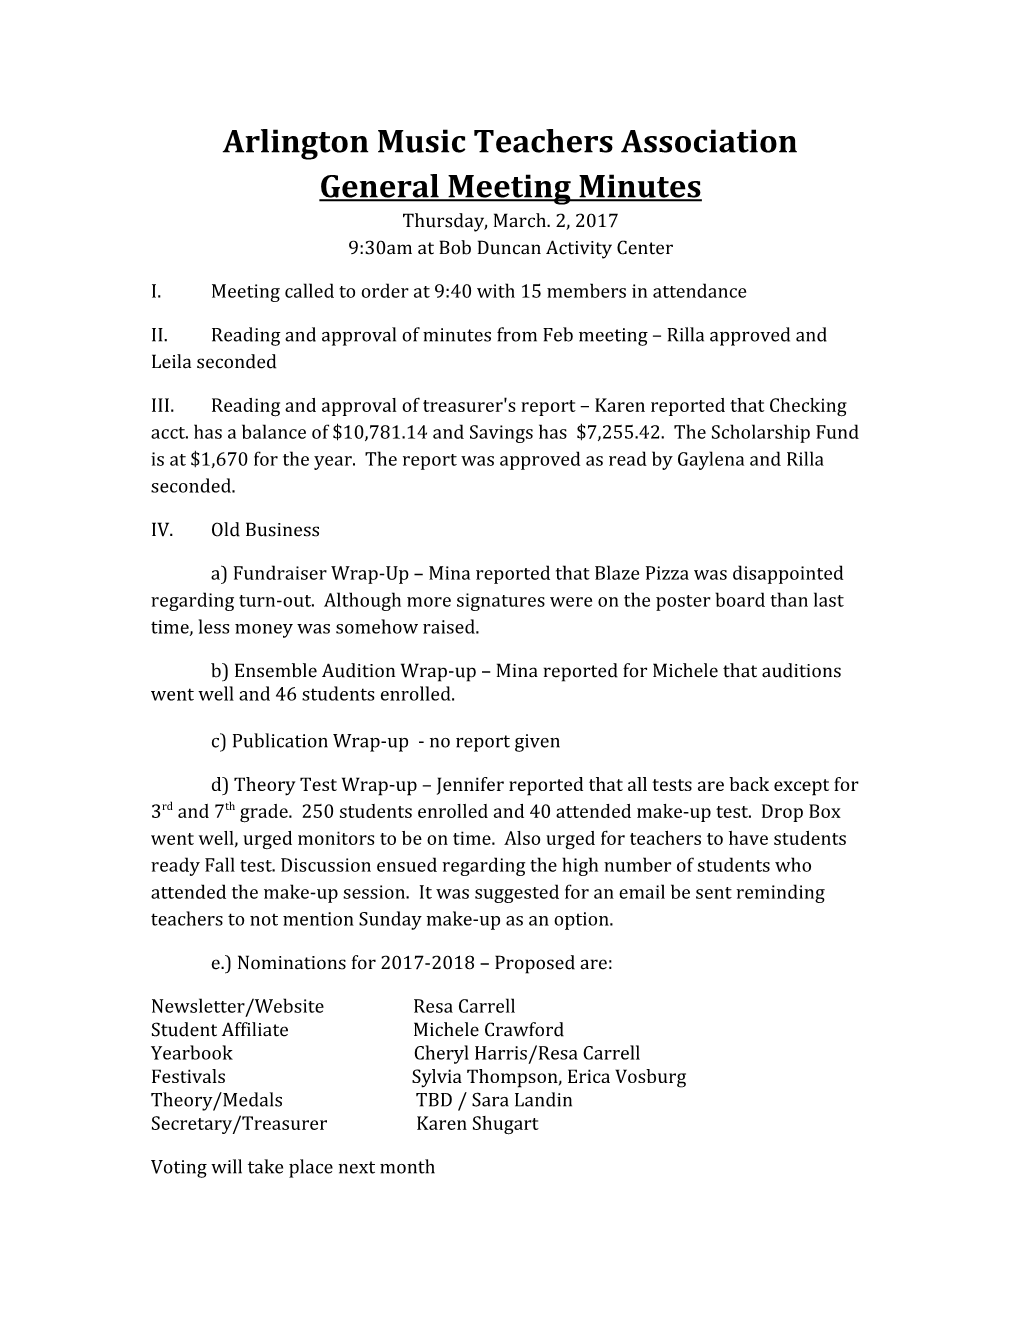 I. Meeting Called to Order at 9:40 with 15 Members in Attendance